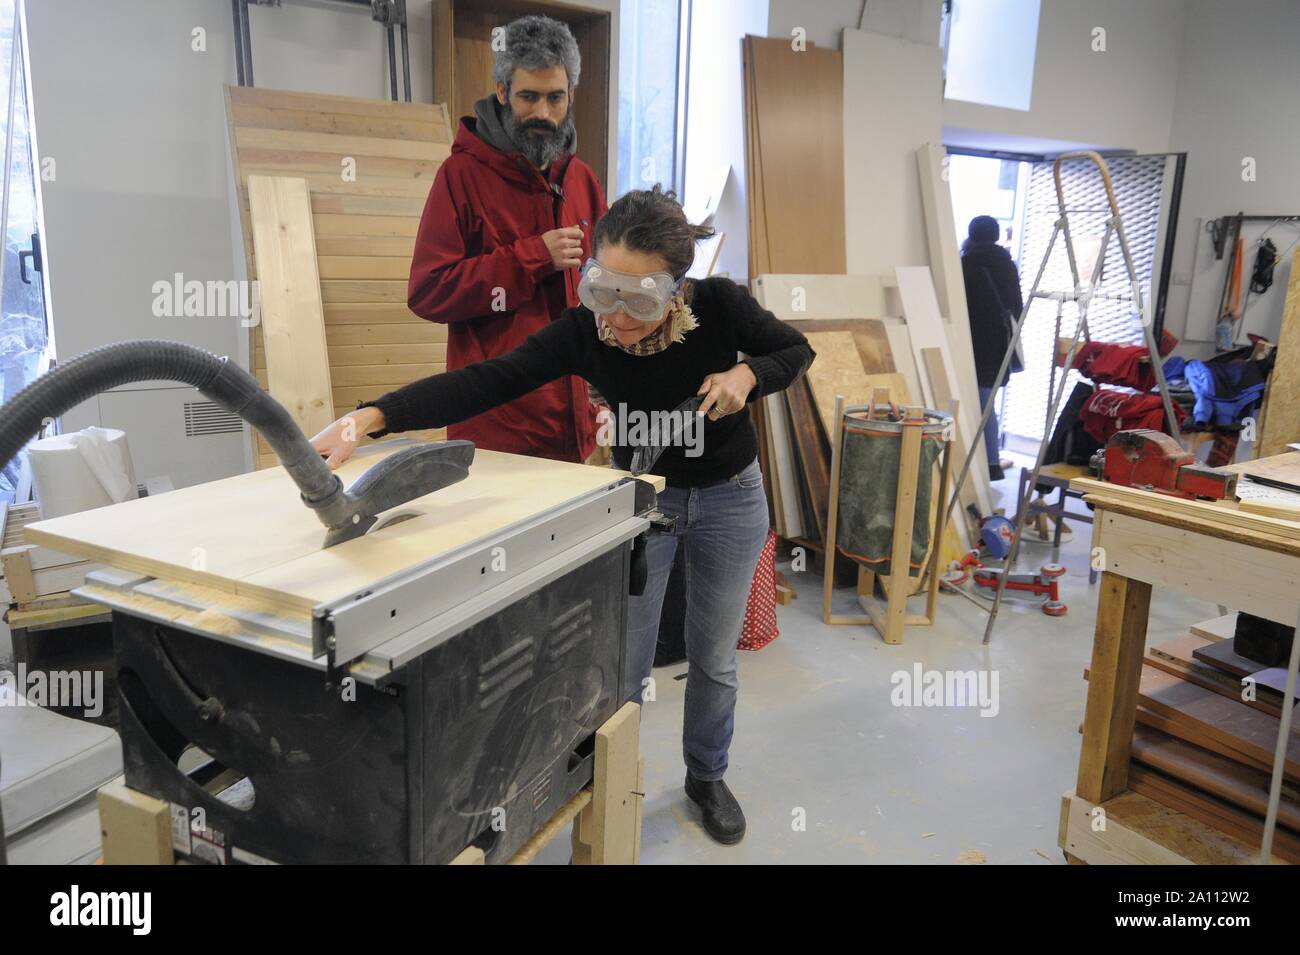 Milan (Italy), Bricheco, joinery workshop for repair and reuse of objects at Stecca degli Artigiani in the Isola district Stock Photo